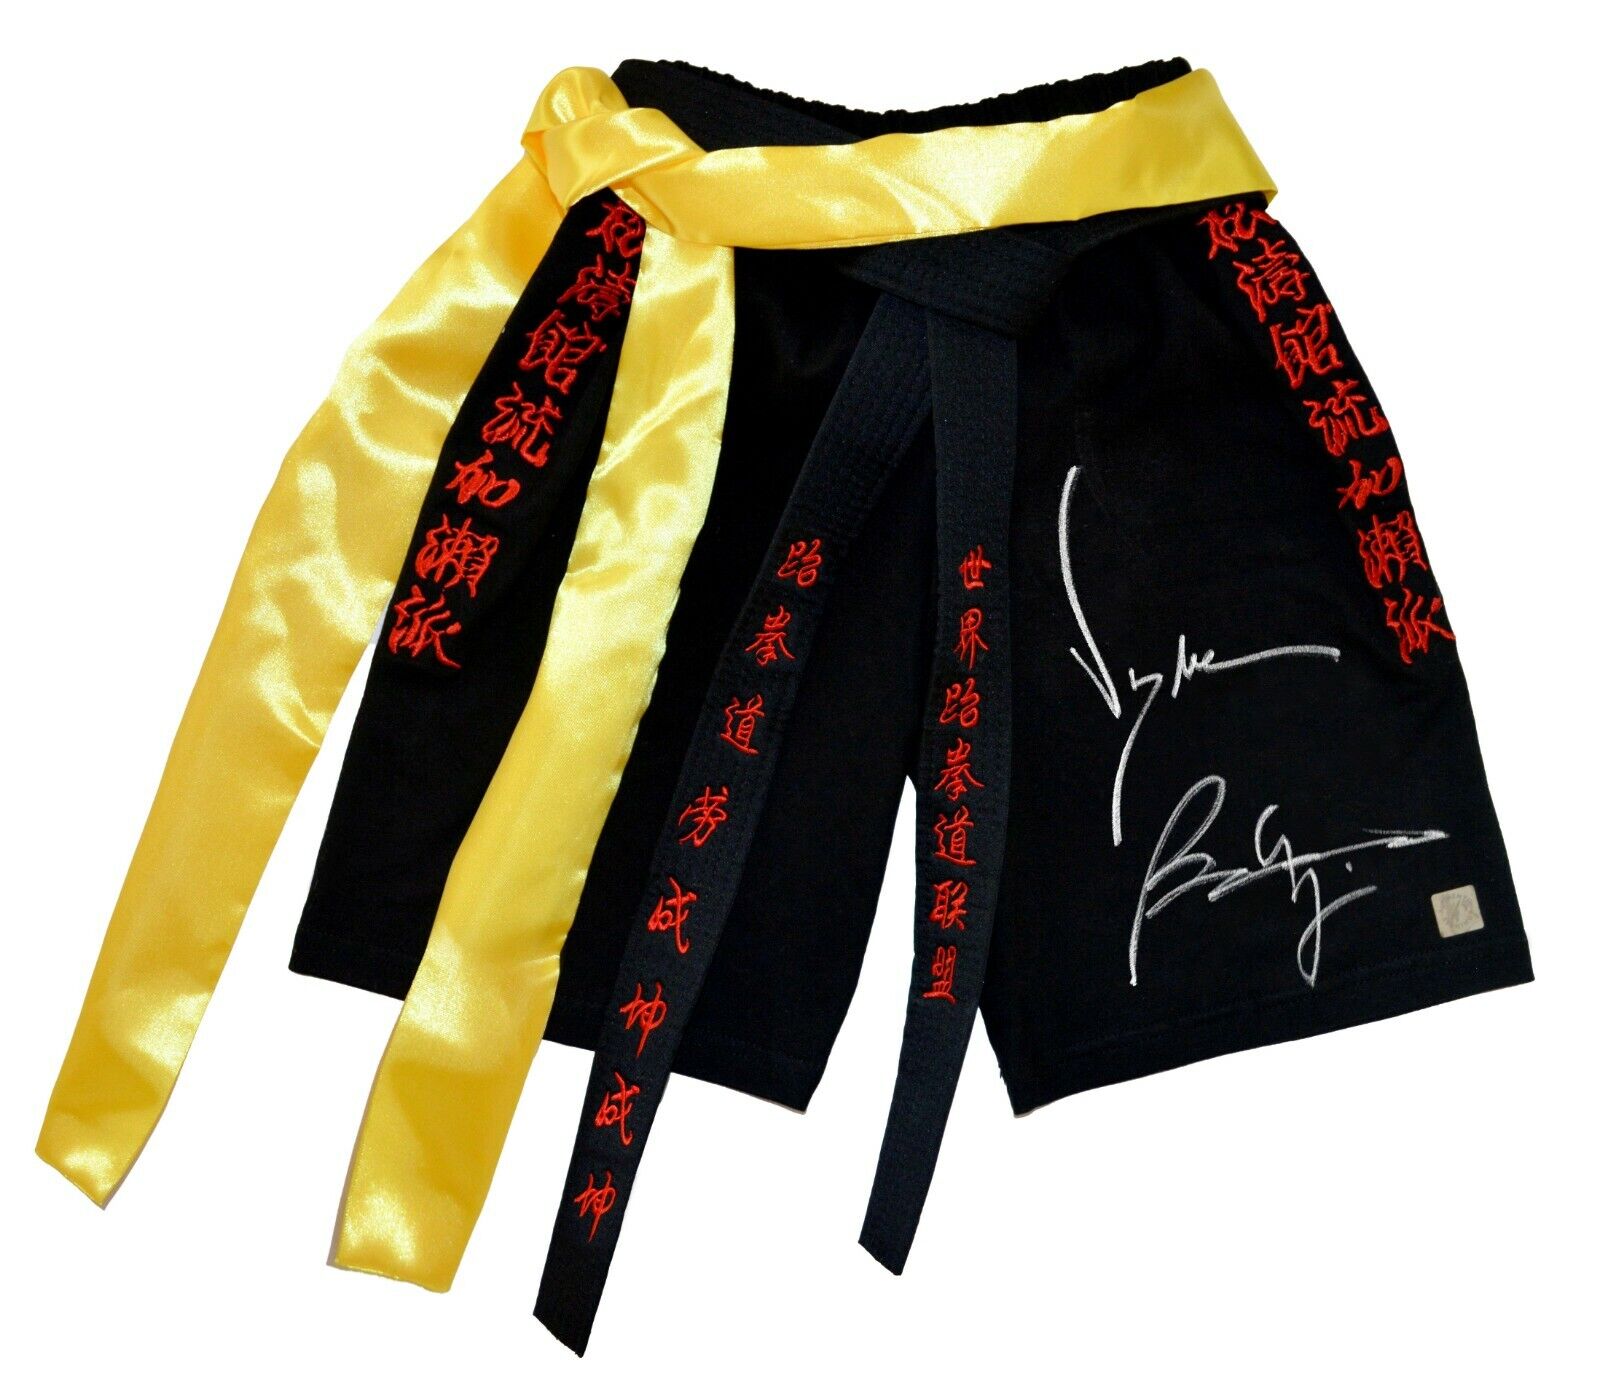 Jean Claude Van Damme & Bolo Yeung Autographed Bloodsport Trunks Asi Proof